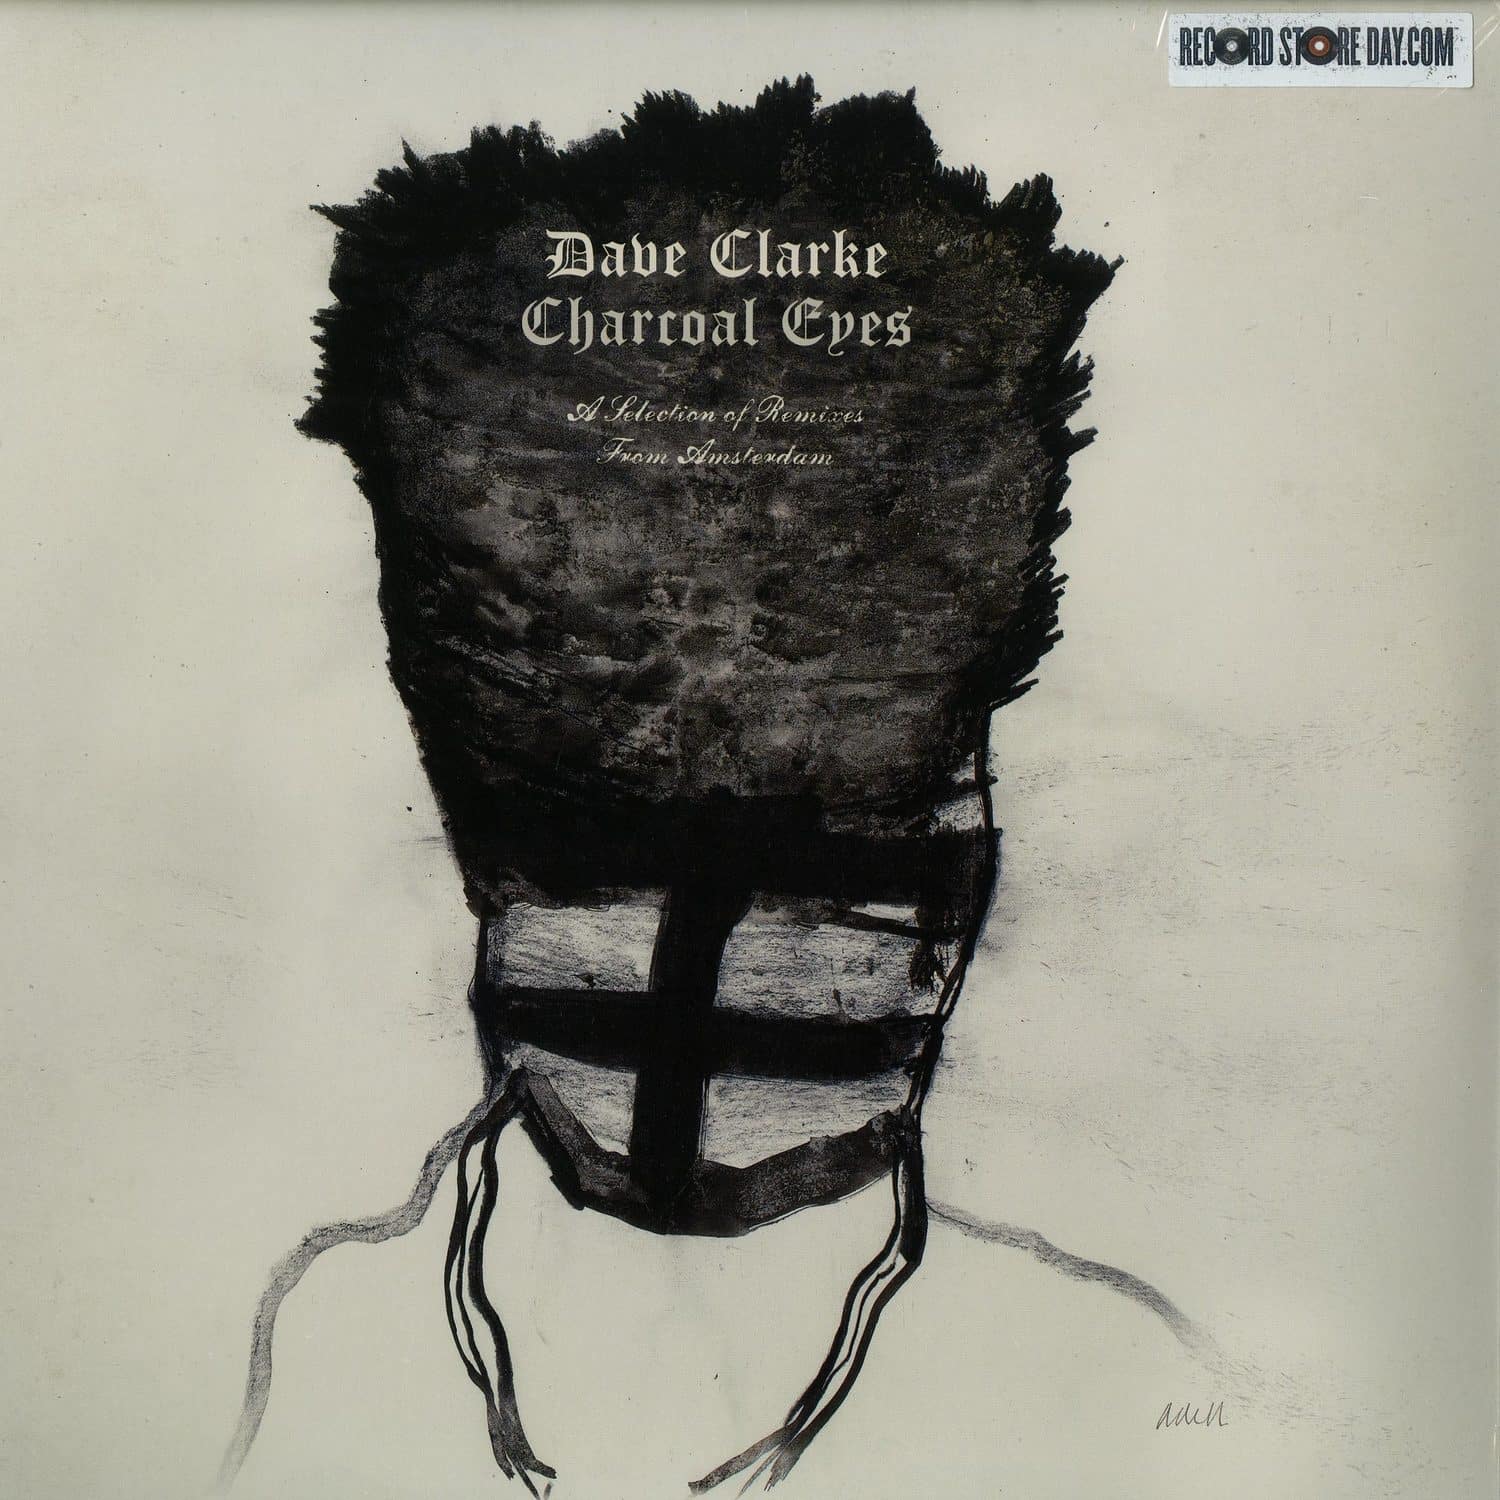 Dave Clarke - CHARCOAL EYES: A SELECTION OF REMIXES FROM AMSTERDAM 